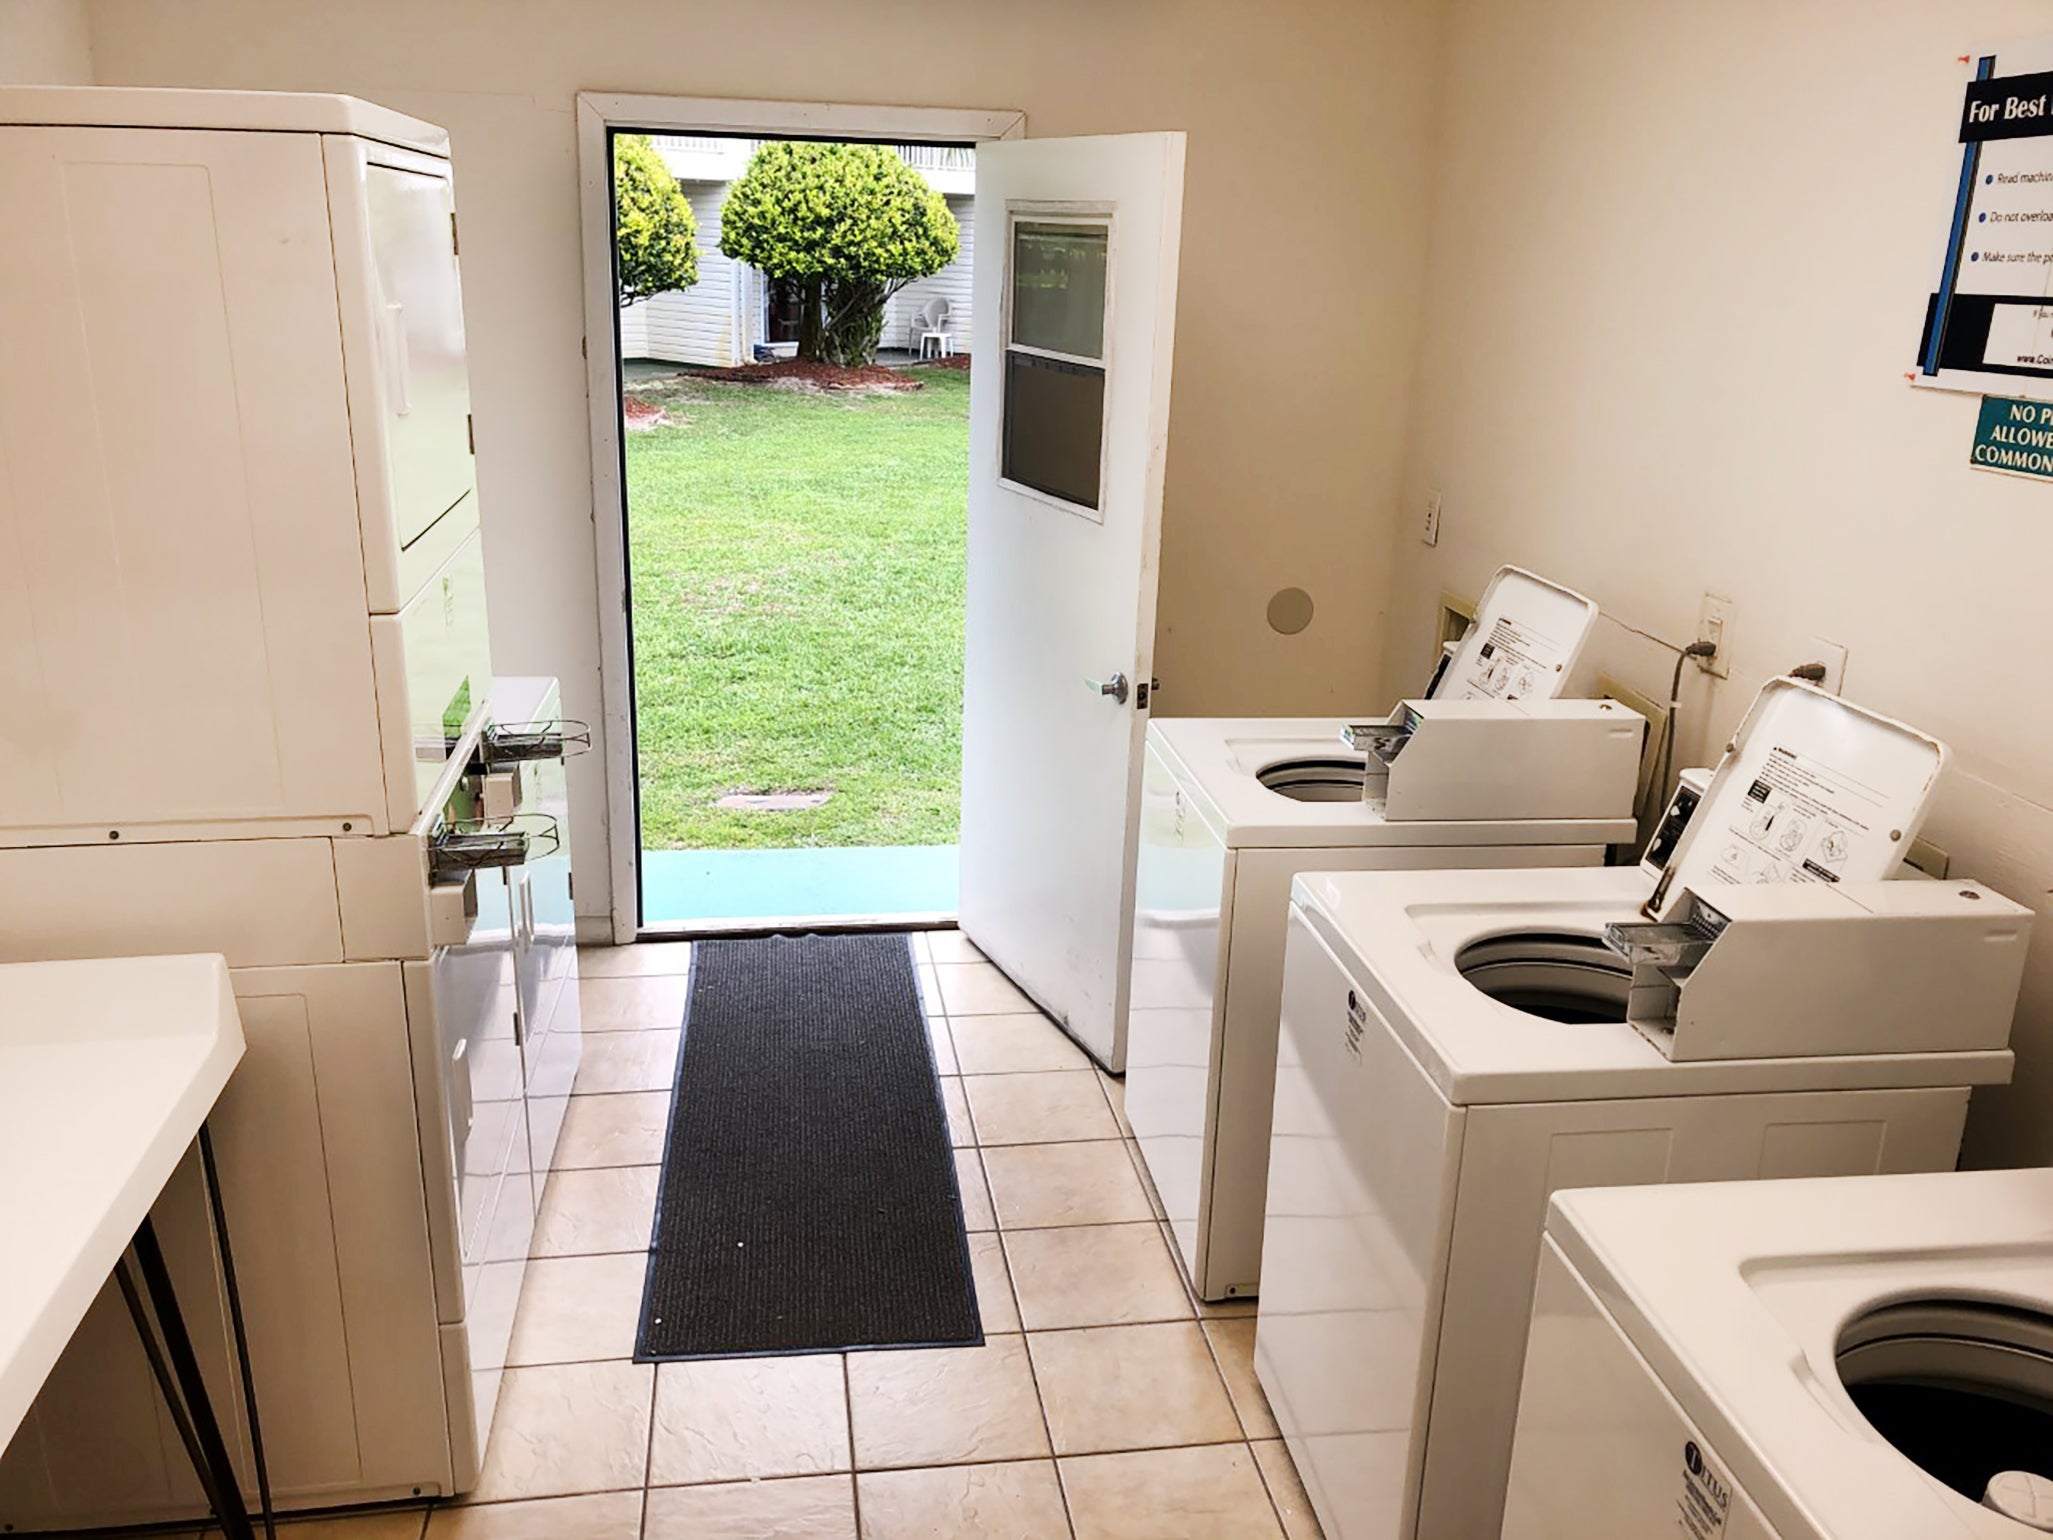 Laundry room is just steps away!